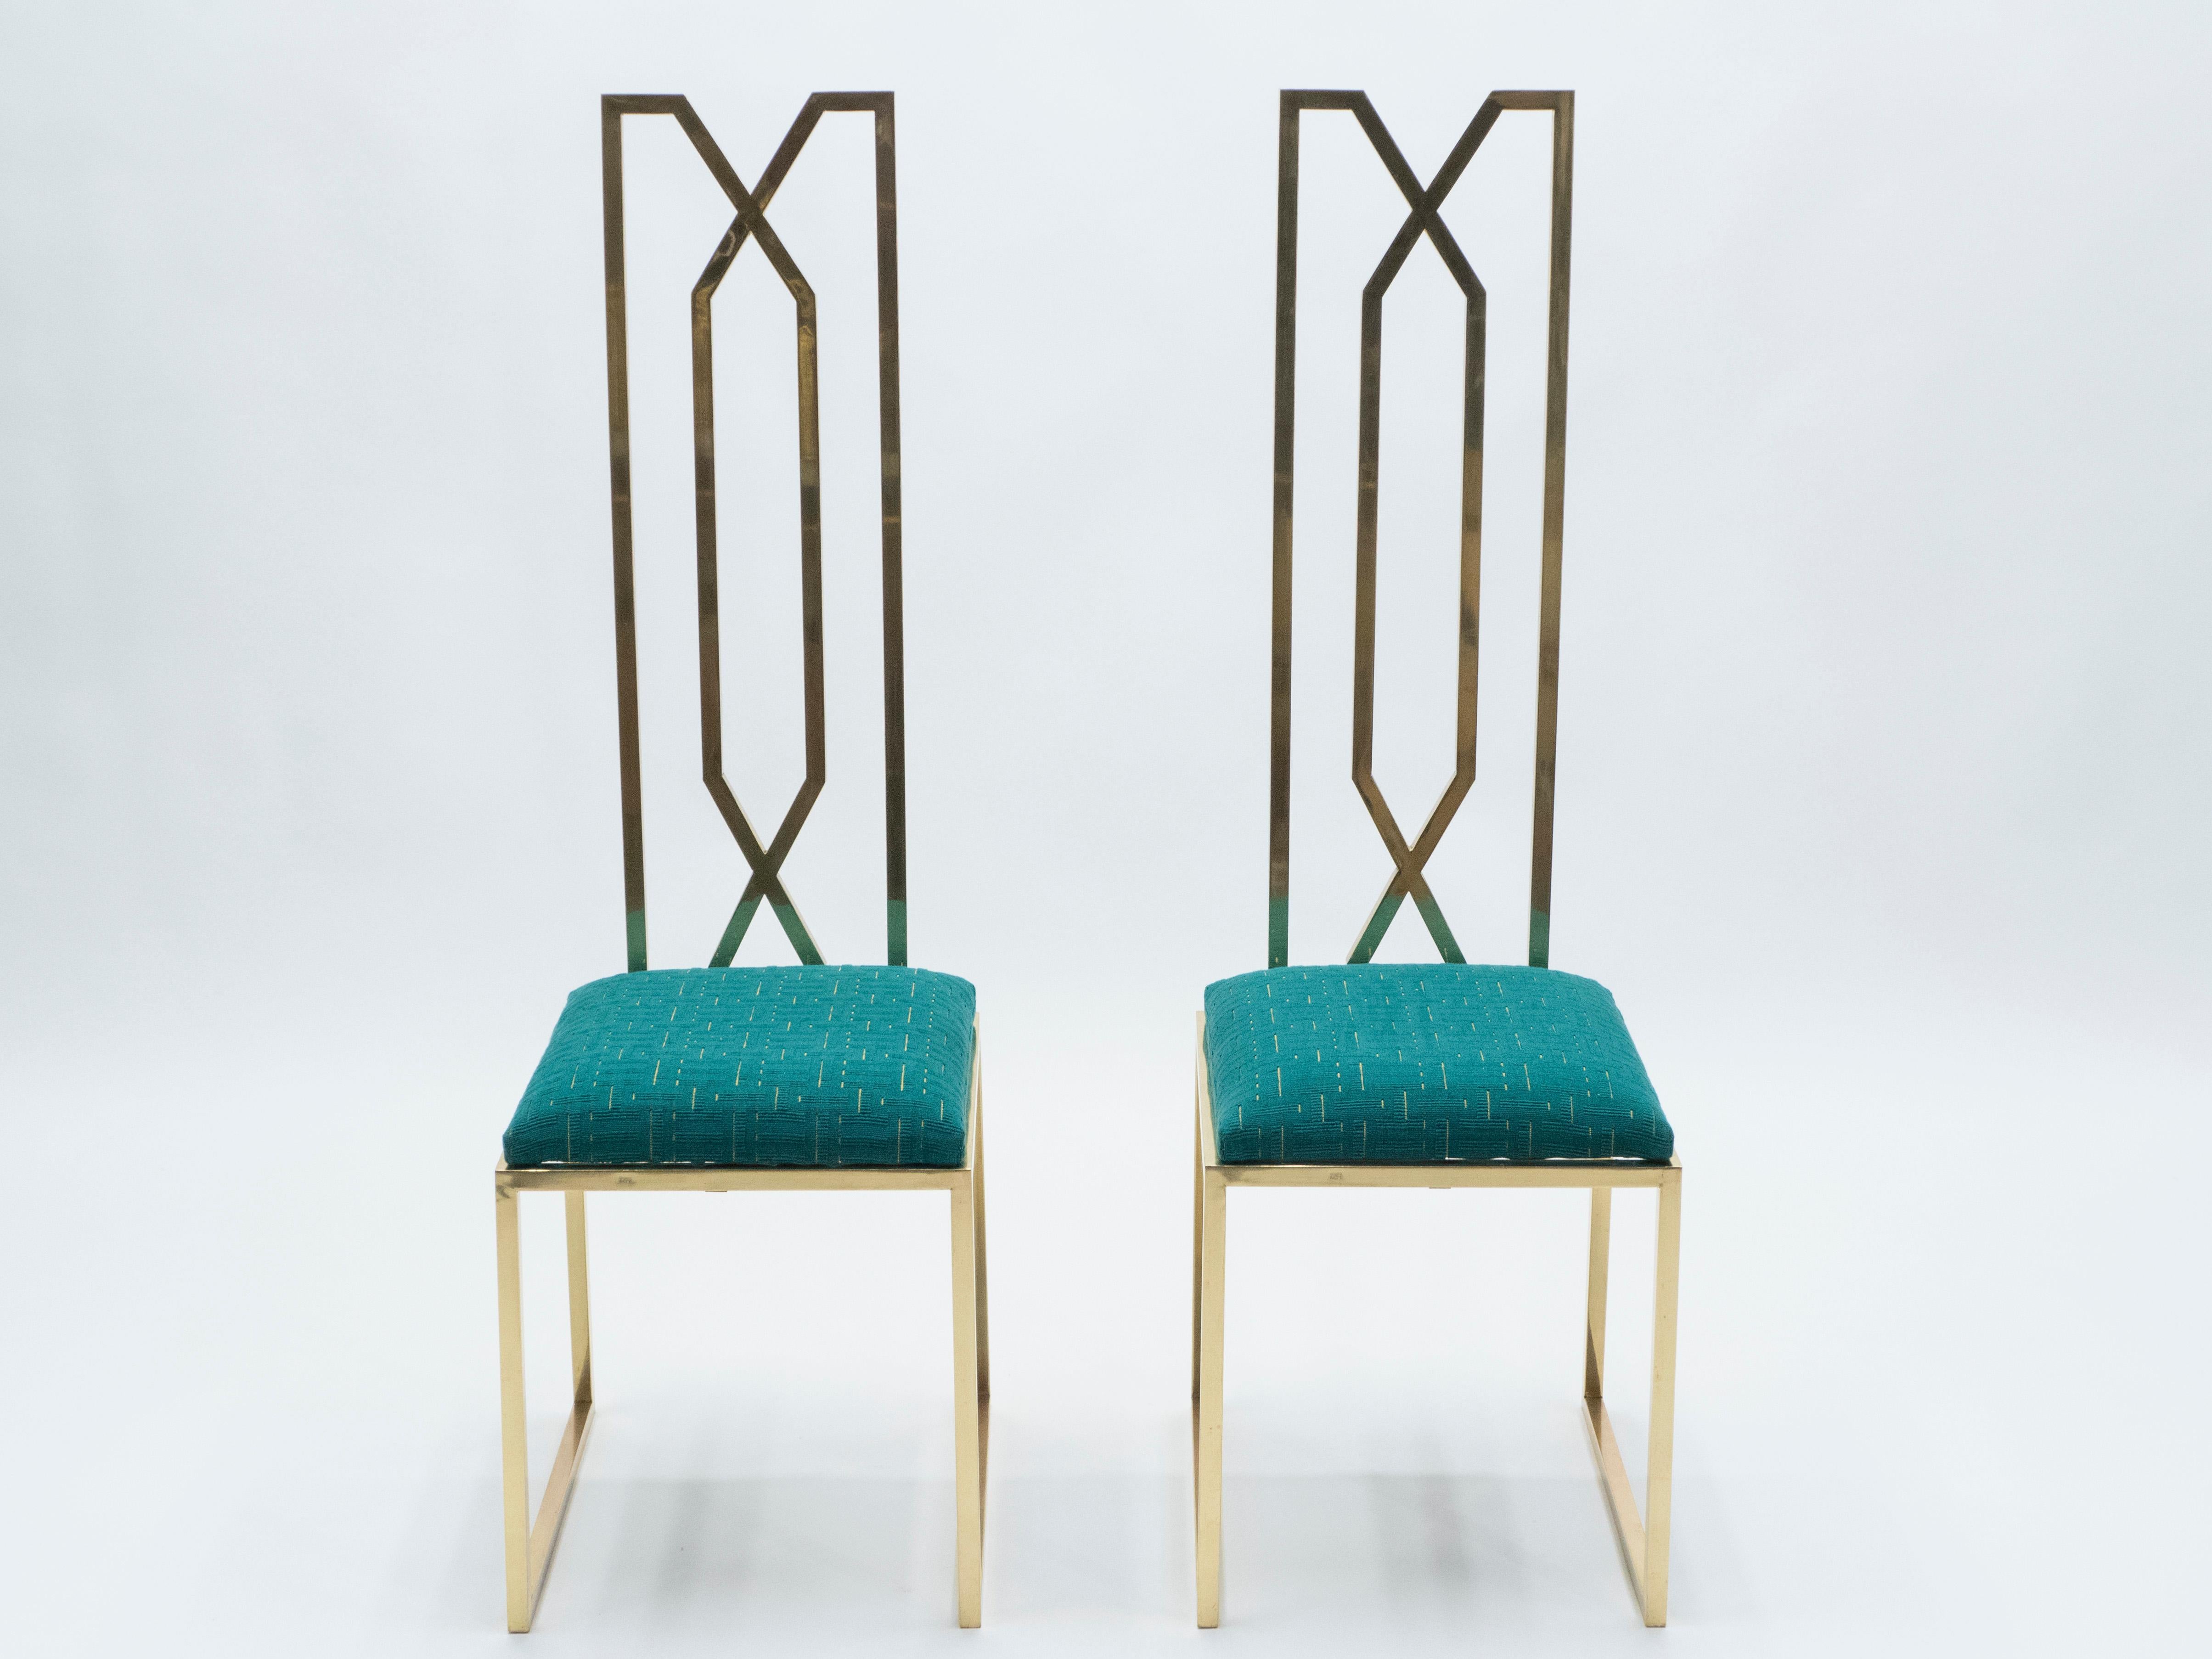 French actor and designer Alain Delon extravagant tastes are evident in this pair of French midcentury chairs. Edited by Jean Charles in the mid-1970s, they are definitely a rare find. Cool brass is fashioned into an inventive, geometric design that